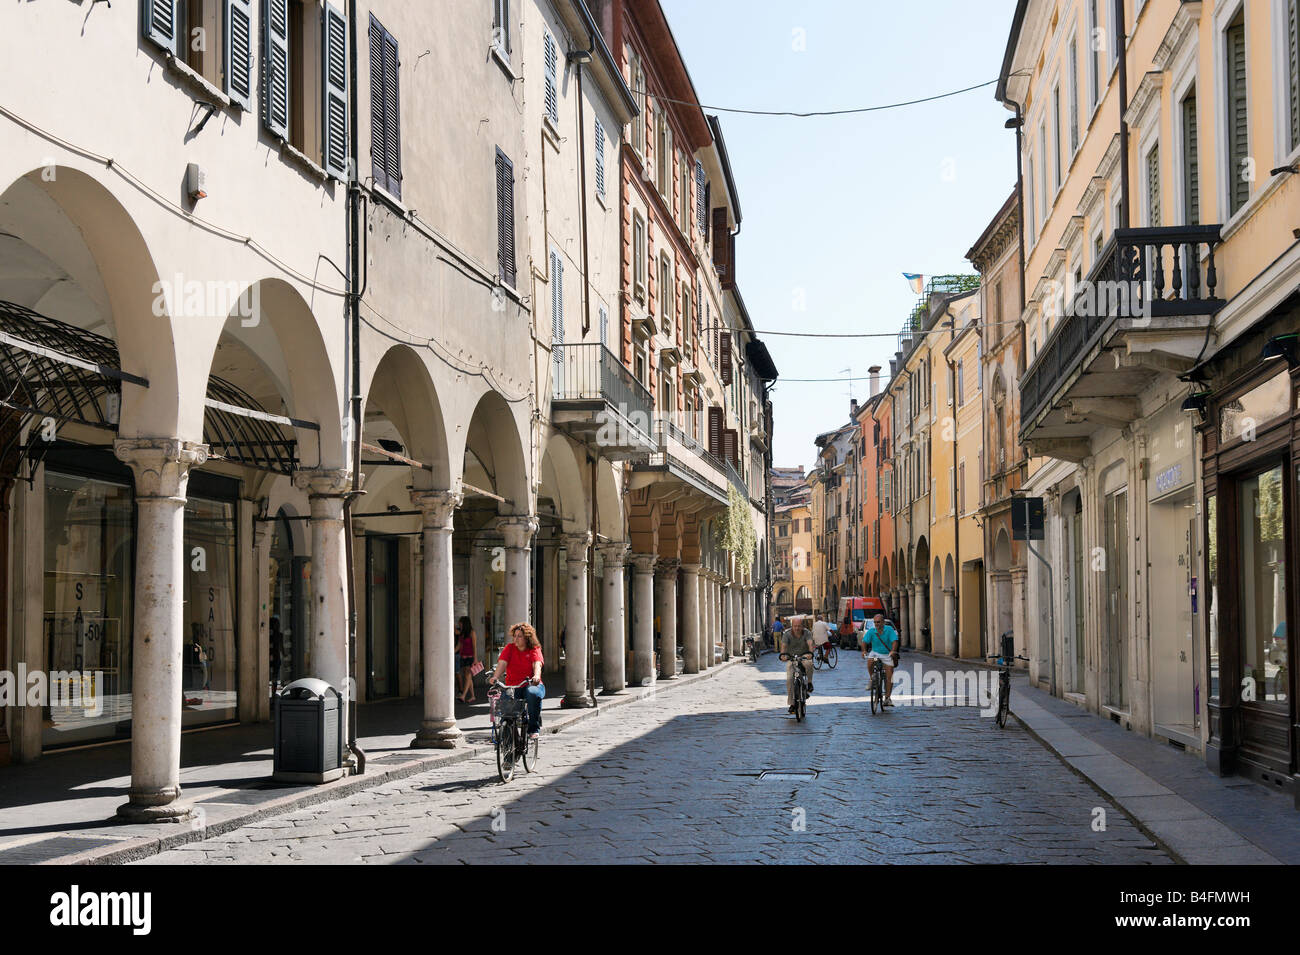 Typical cobbled street in the old city, Mantua (Mantova), Lombardy, Italy Stock Photo